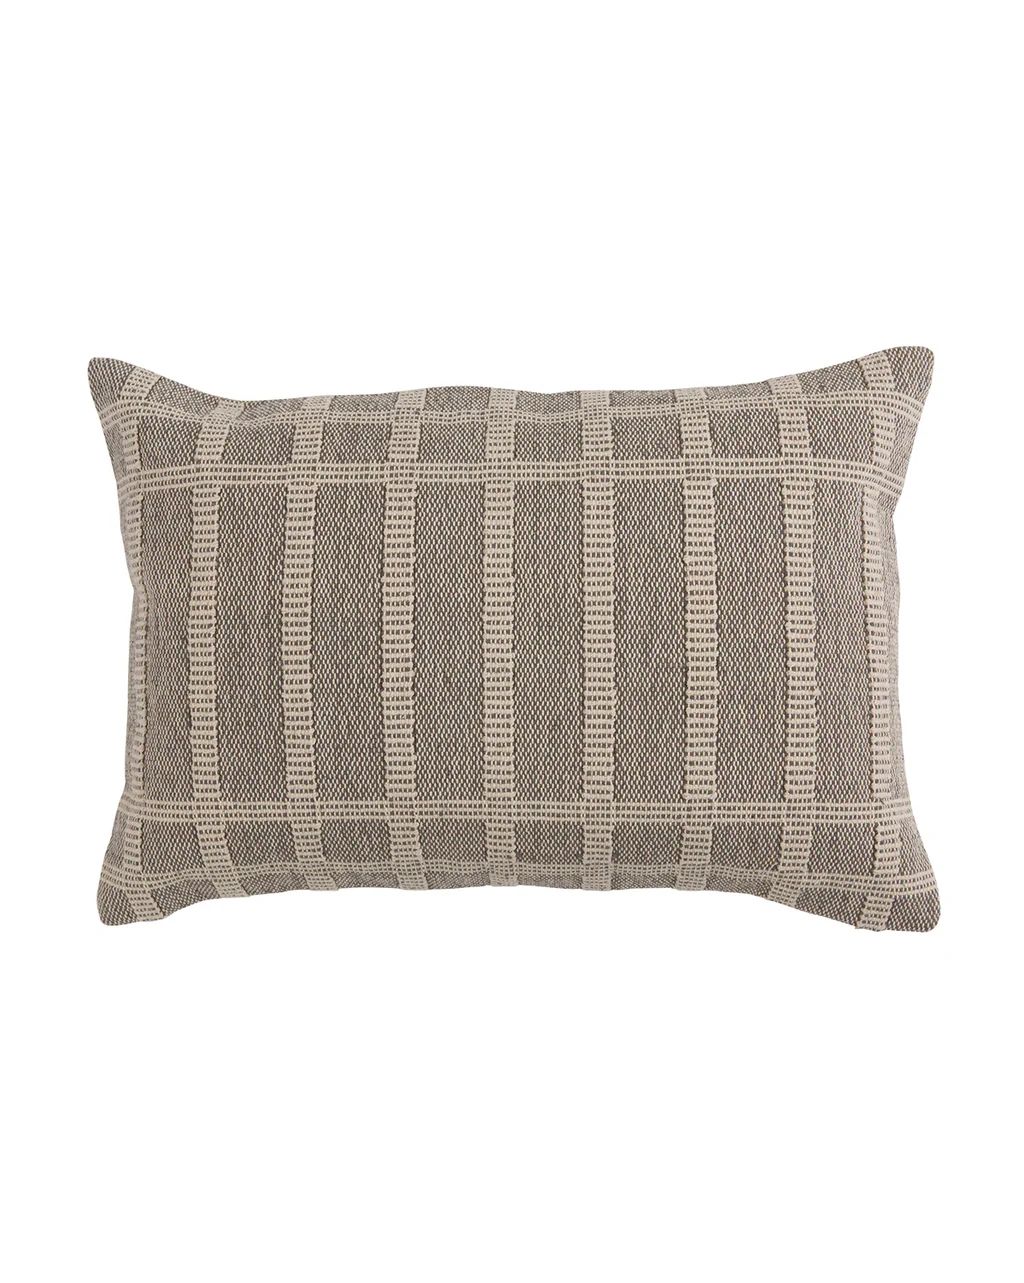 Collins Woven Pillow Cover | McGee & Co.